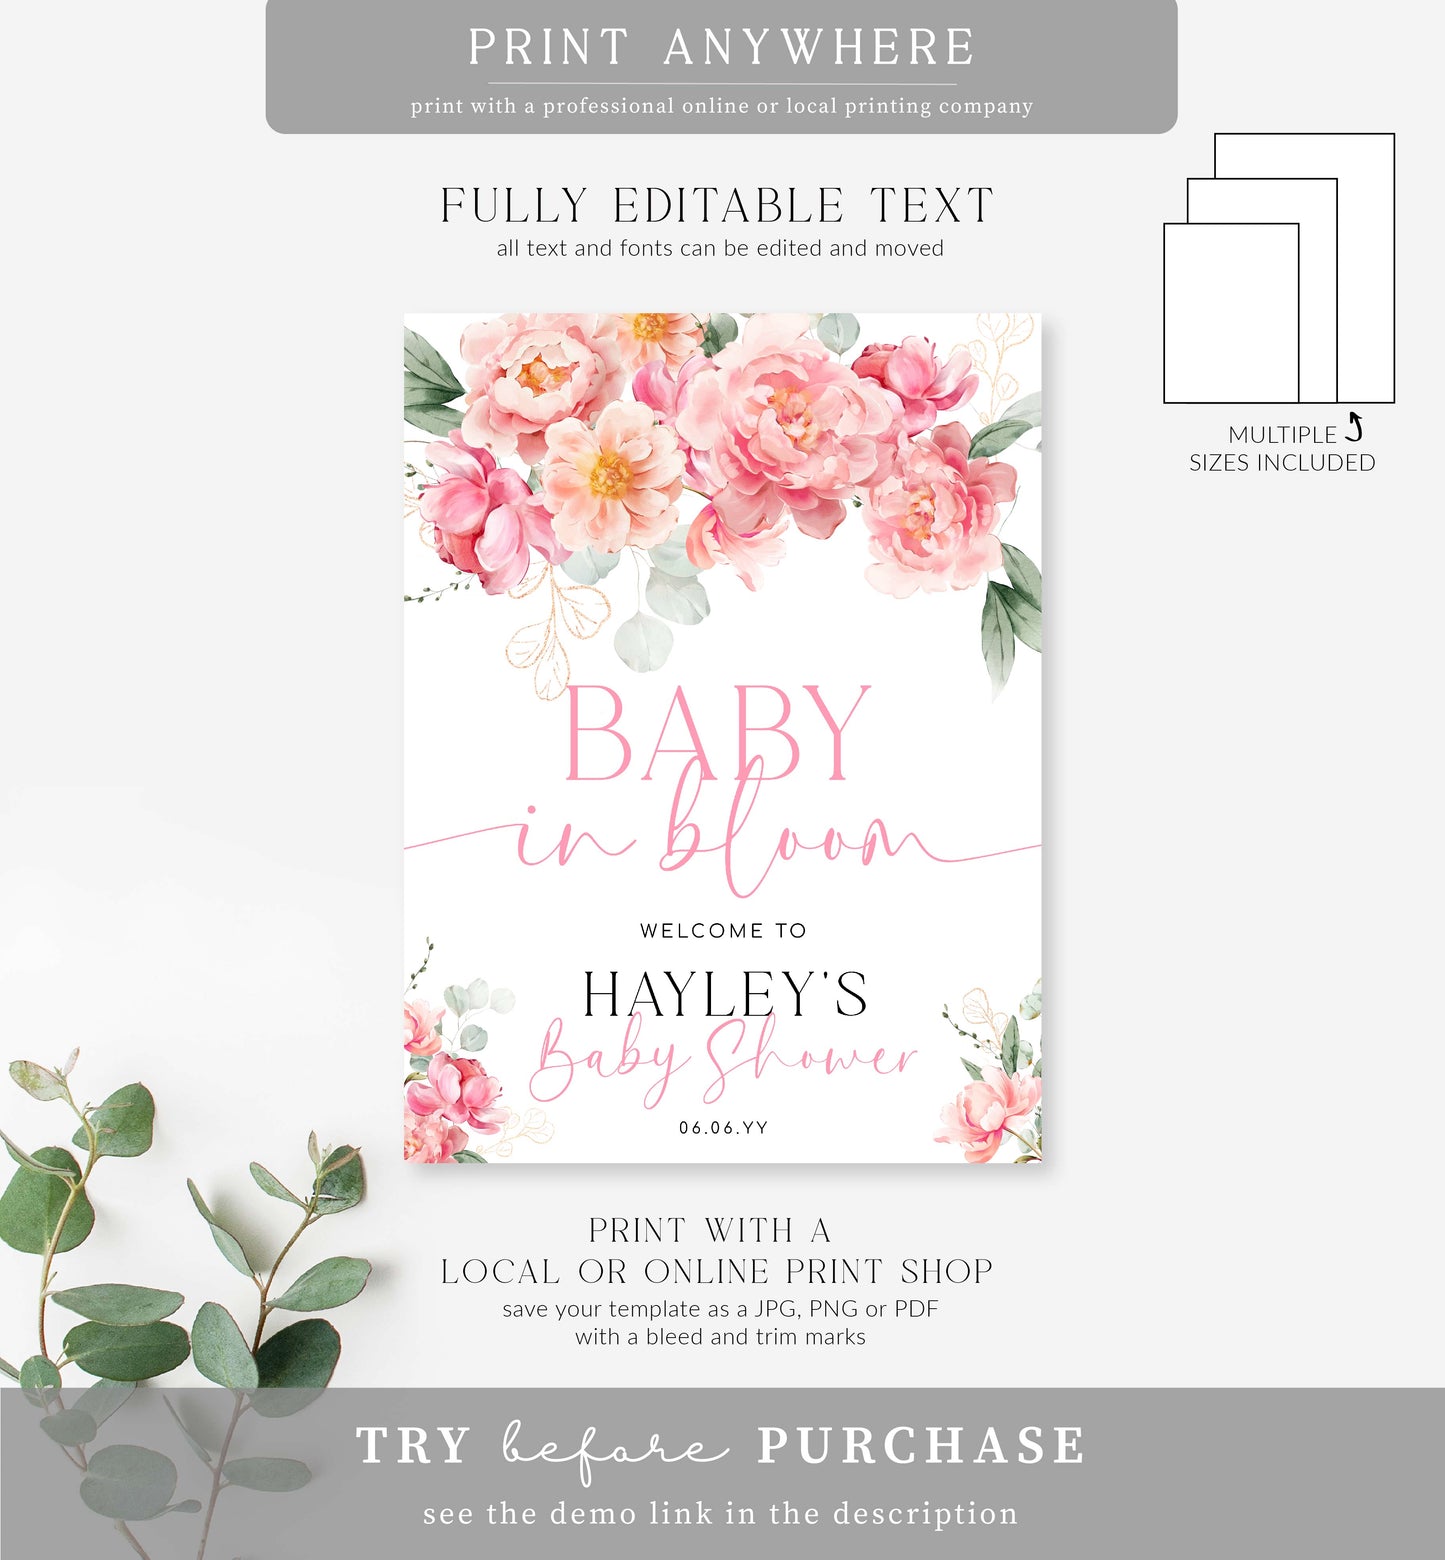 Piper Floral White | Printable Welcome Sign Template